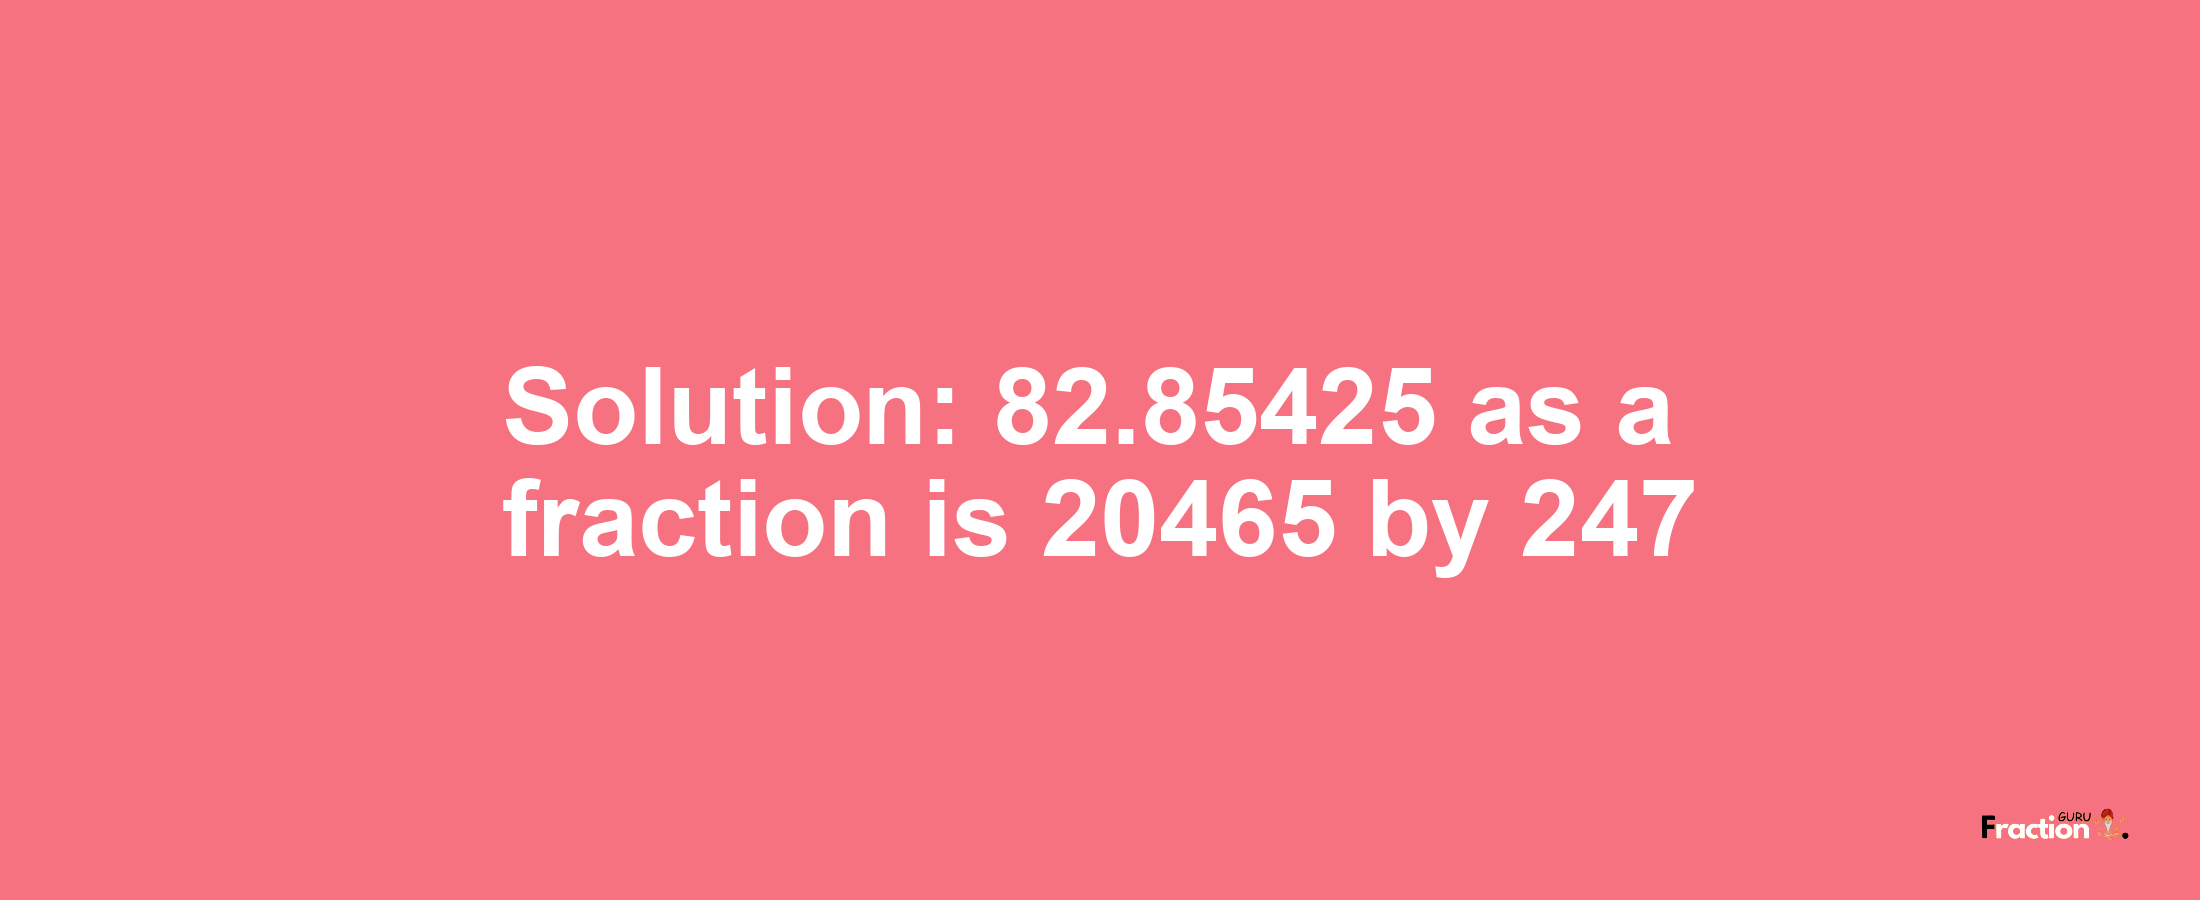 Solution:82.85425 as a fraction is 20465/247